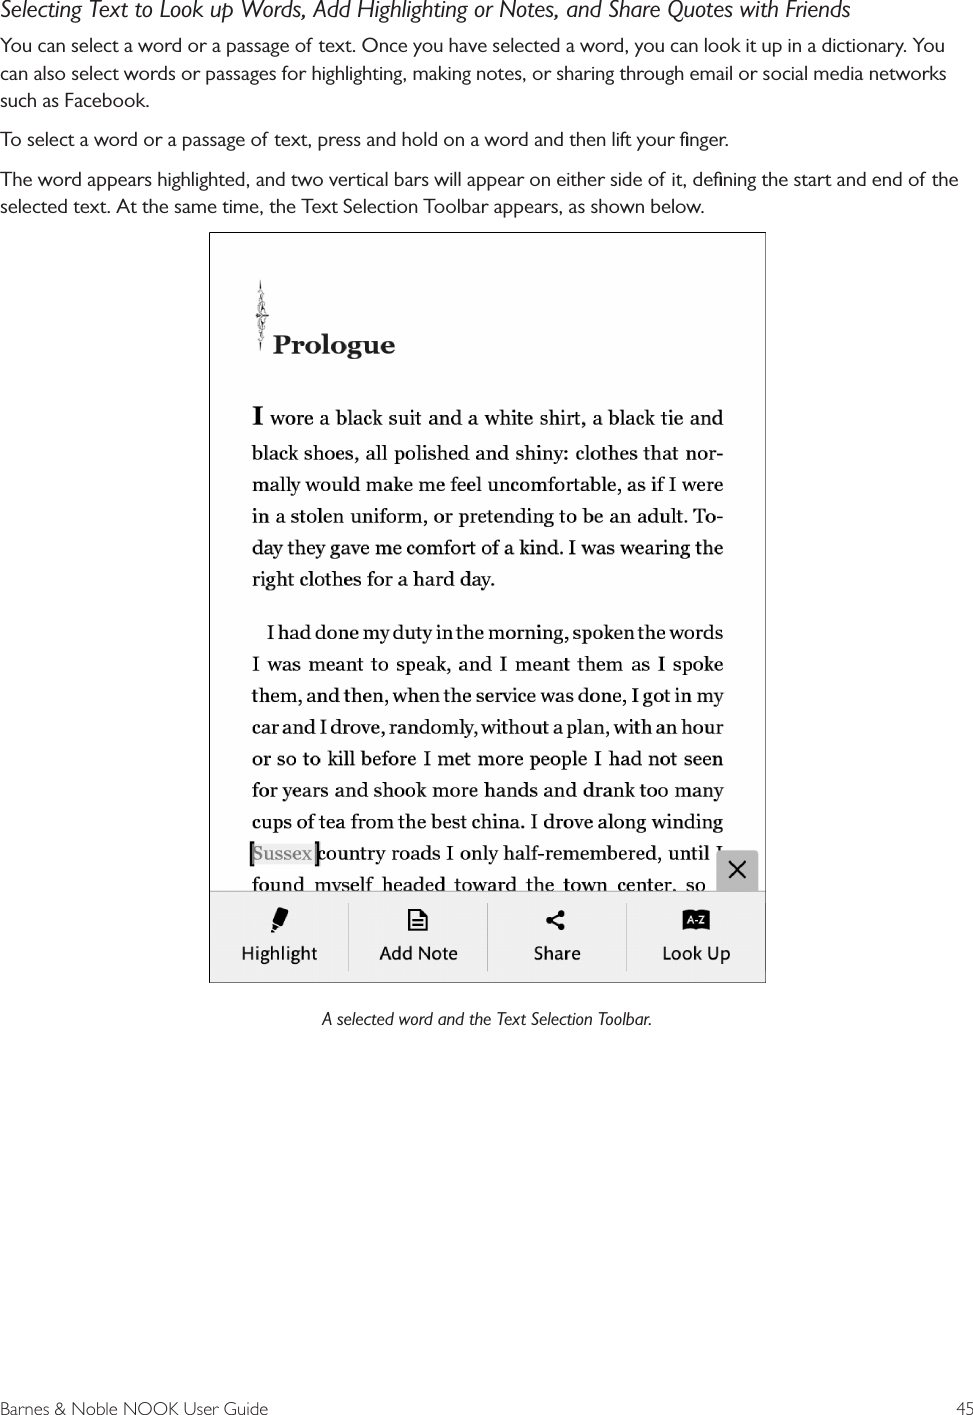 Barnes &amp; Noble NOOK User Guide  45Selecting Text to Look up Words, Add Highlighting or Notes, and Share Quotes with FriendsYou can select a word or a passage of text. Once you have selected a word, you can look it up in a dictionary. You can also select words or passages for highlighting, making notes, or sharing through email or social media networks such as Facebook.To select a word or a passage of text, press and hold on a word and then lift your ﬁnger.The word appears highlighted, and two vertical bars will appear on either side of it, deﬁning the start and end of the selected text. At the same time, the Text Selection Toolbar appears, as shown below.A selected word and the Text Selection Toolbar.